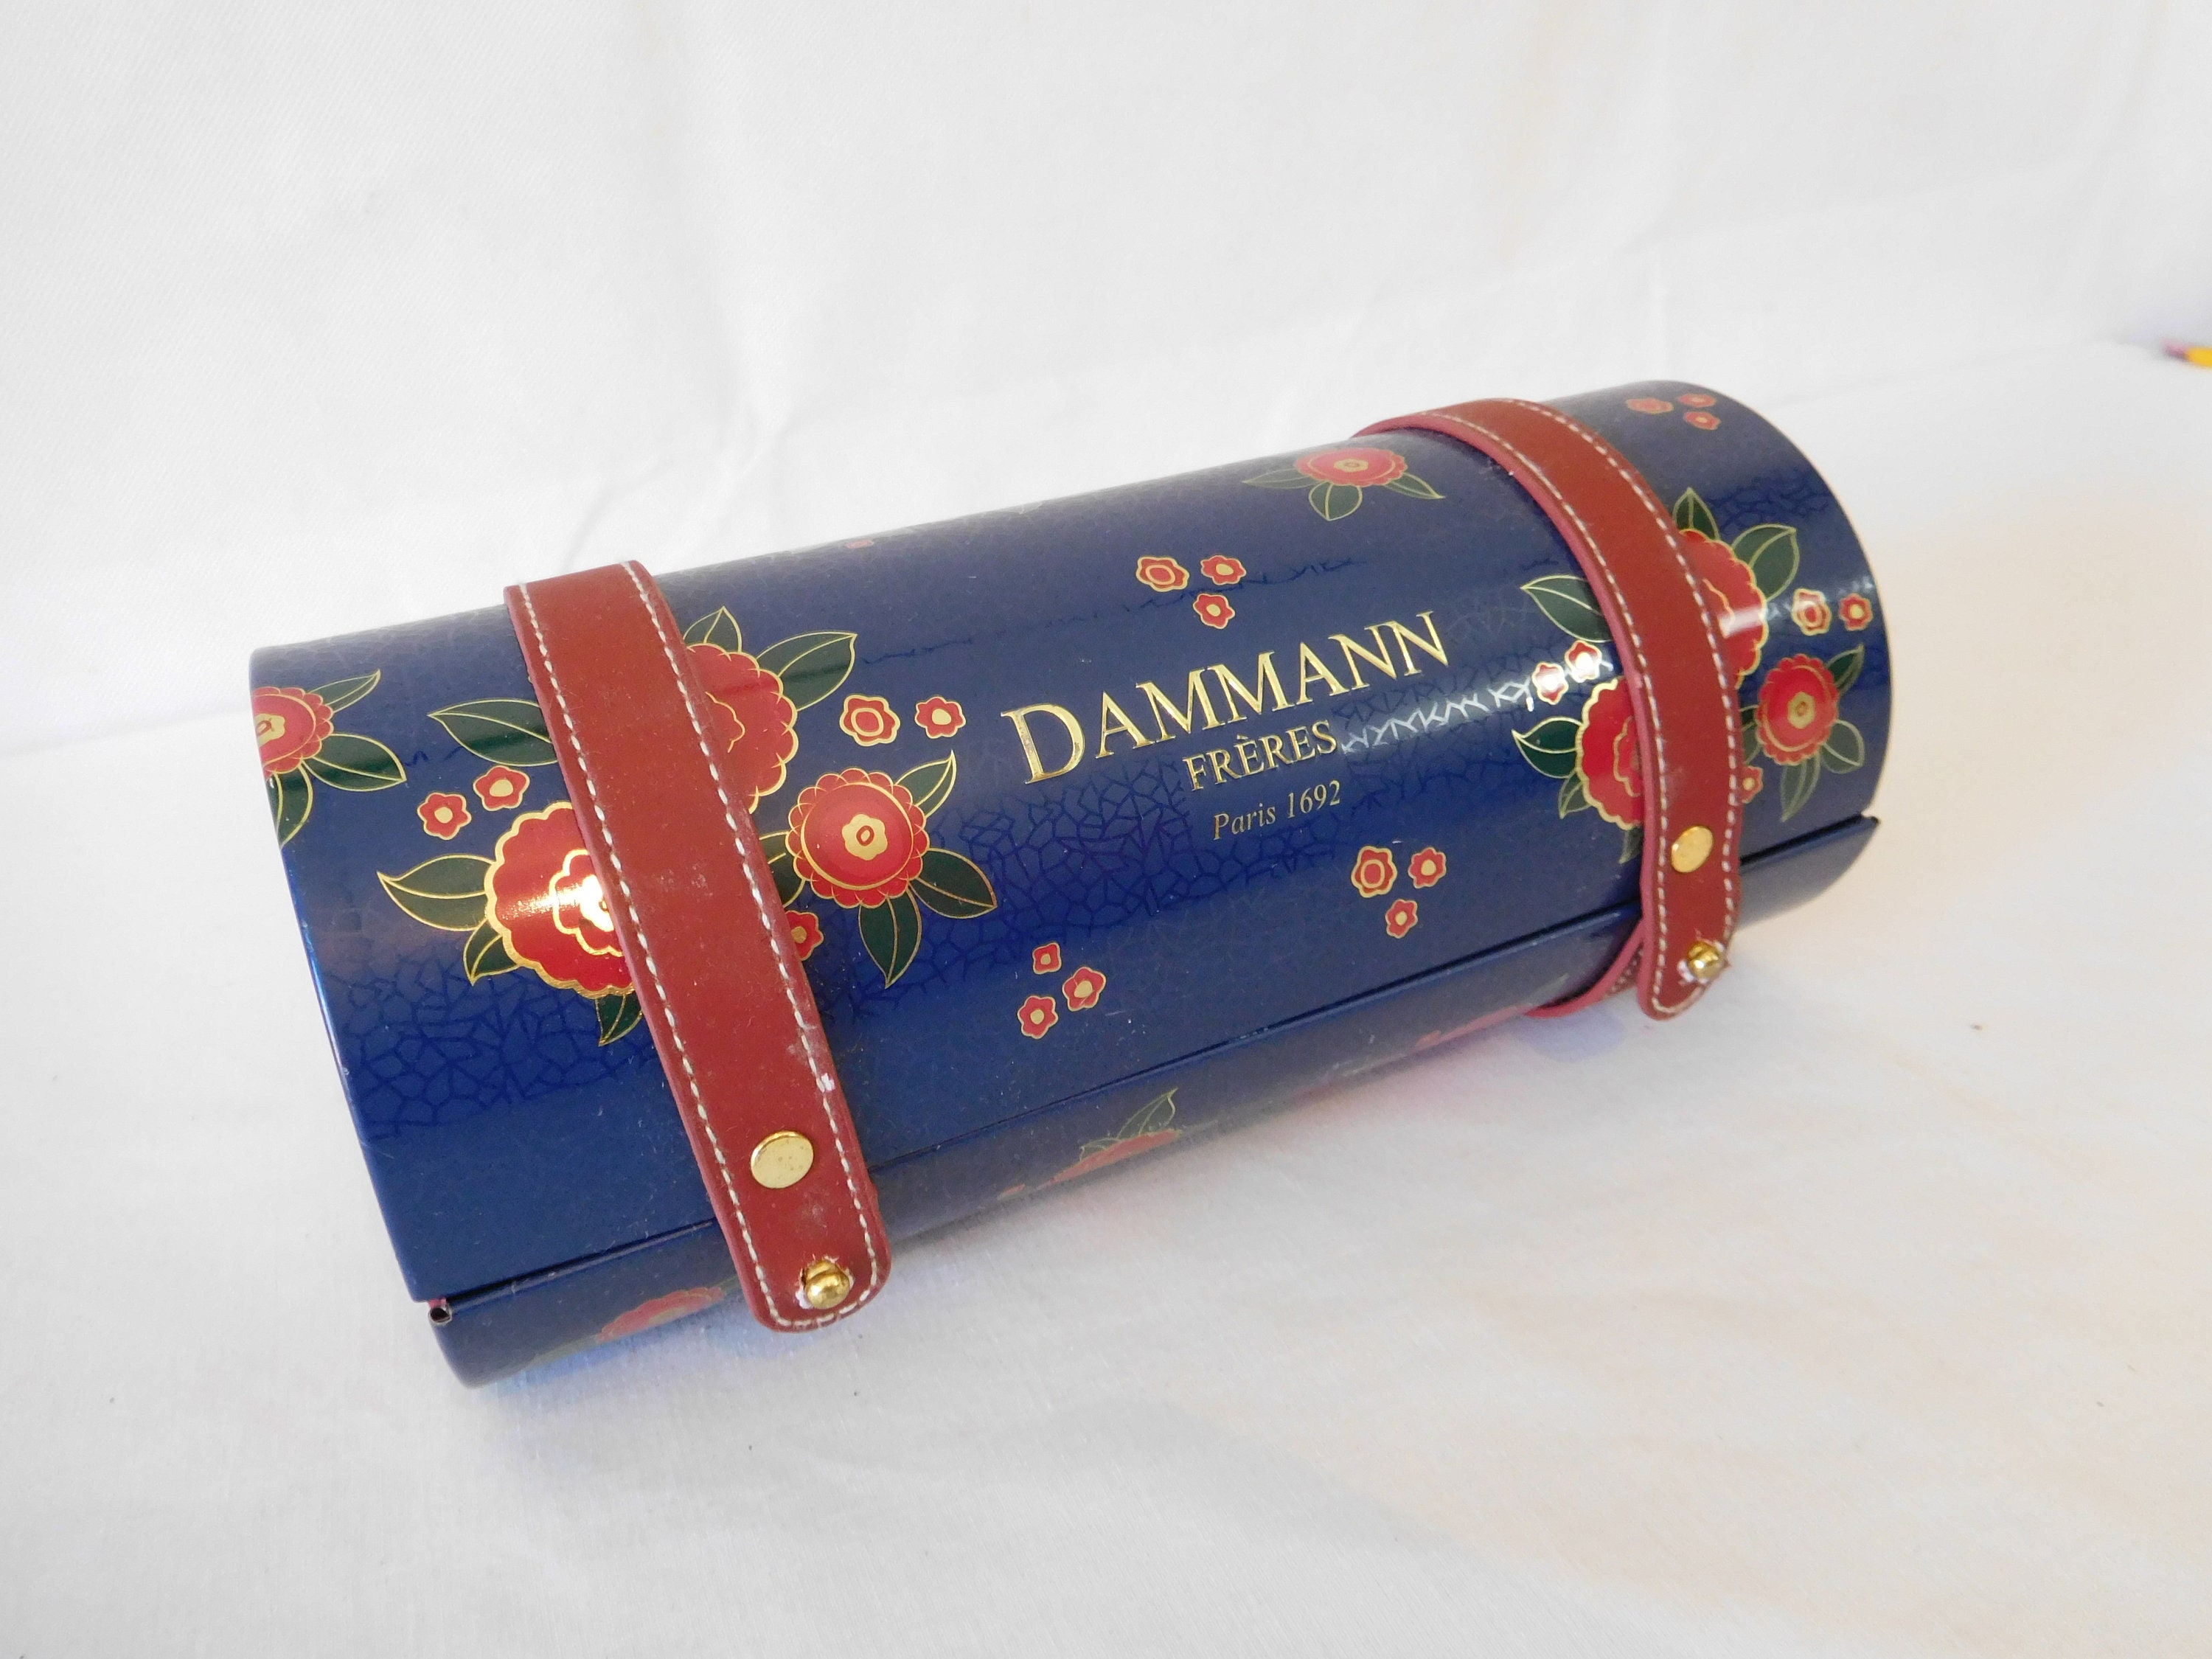 Does anybody have experience with Dammann Frères of Paris? For